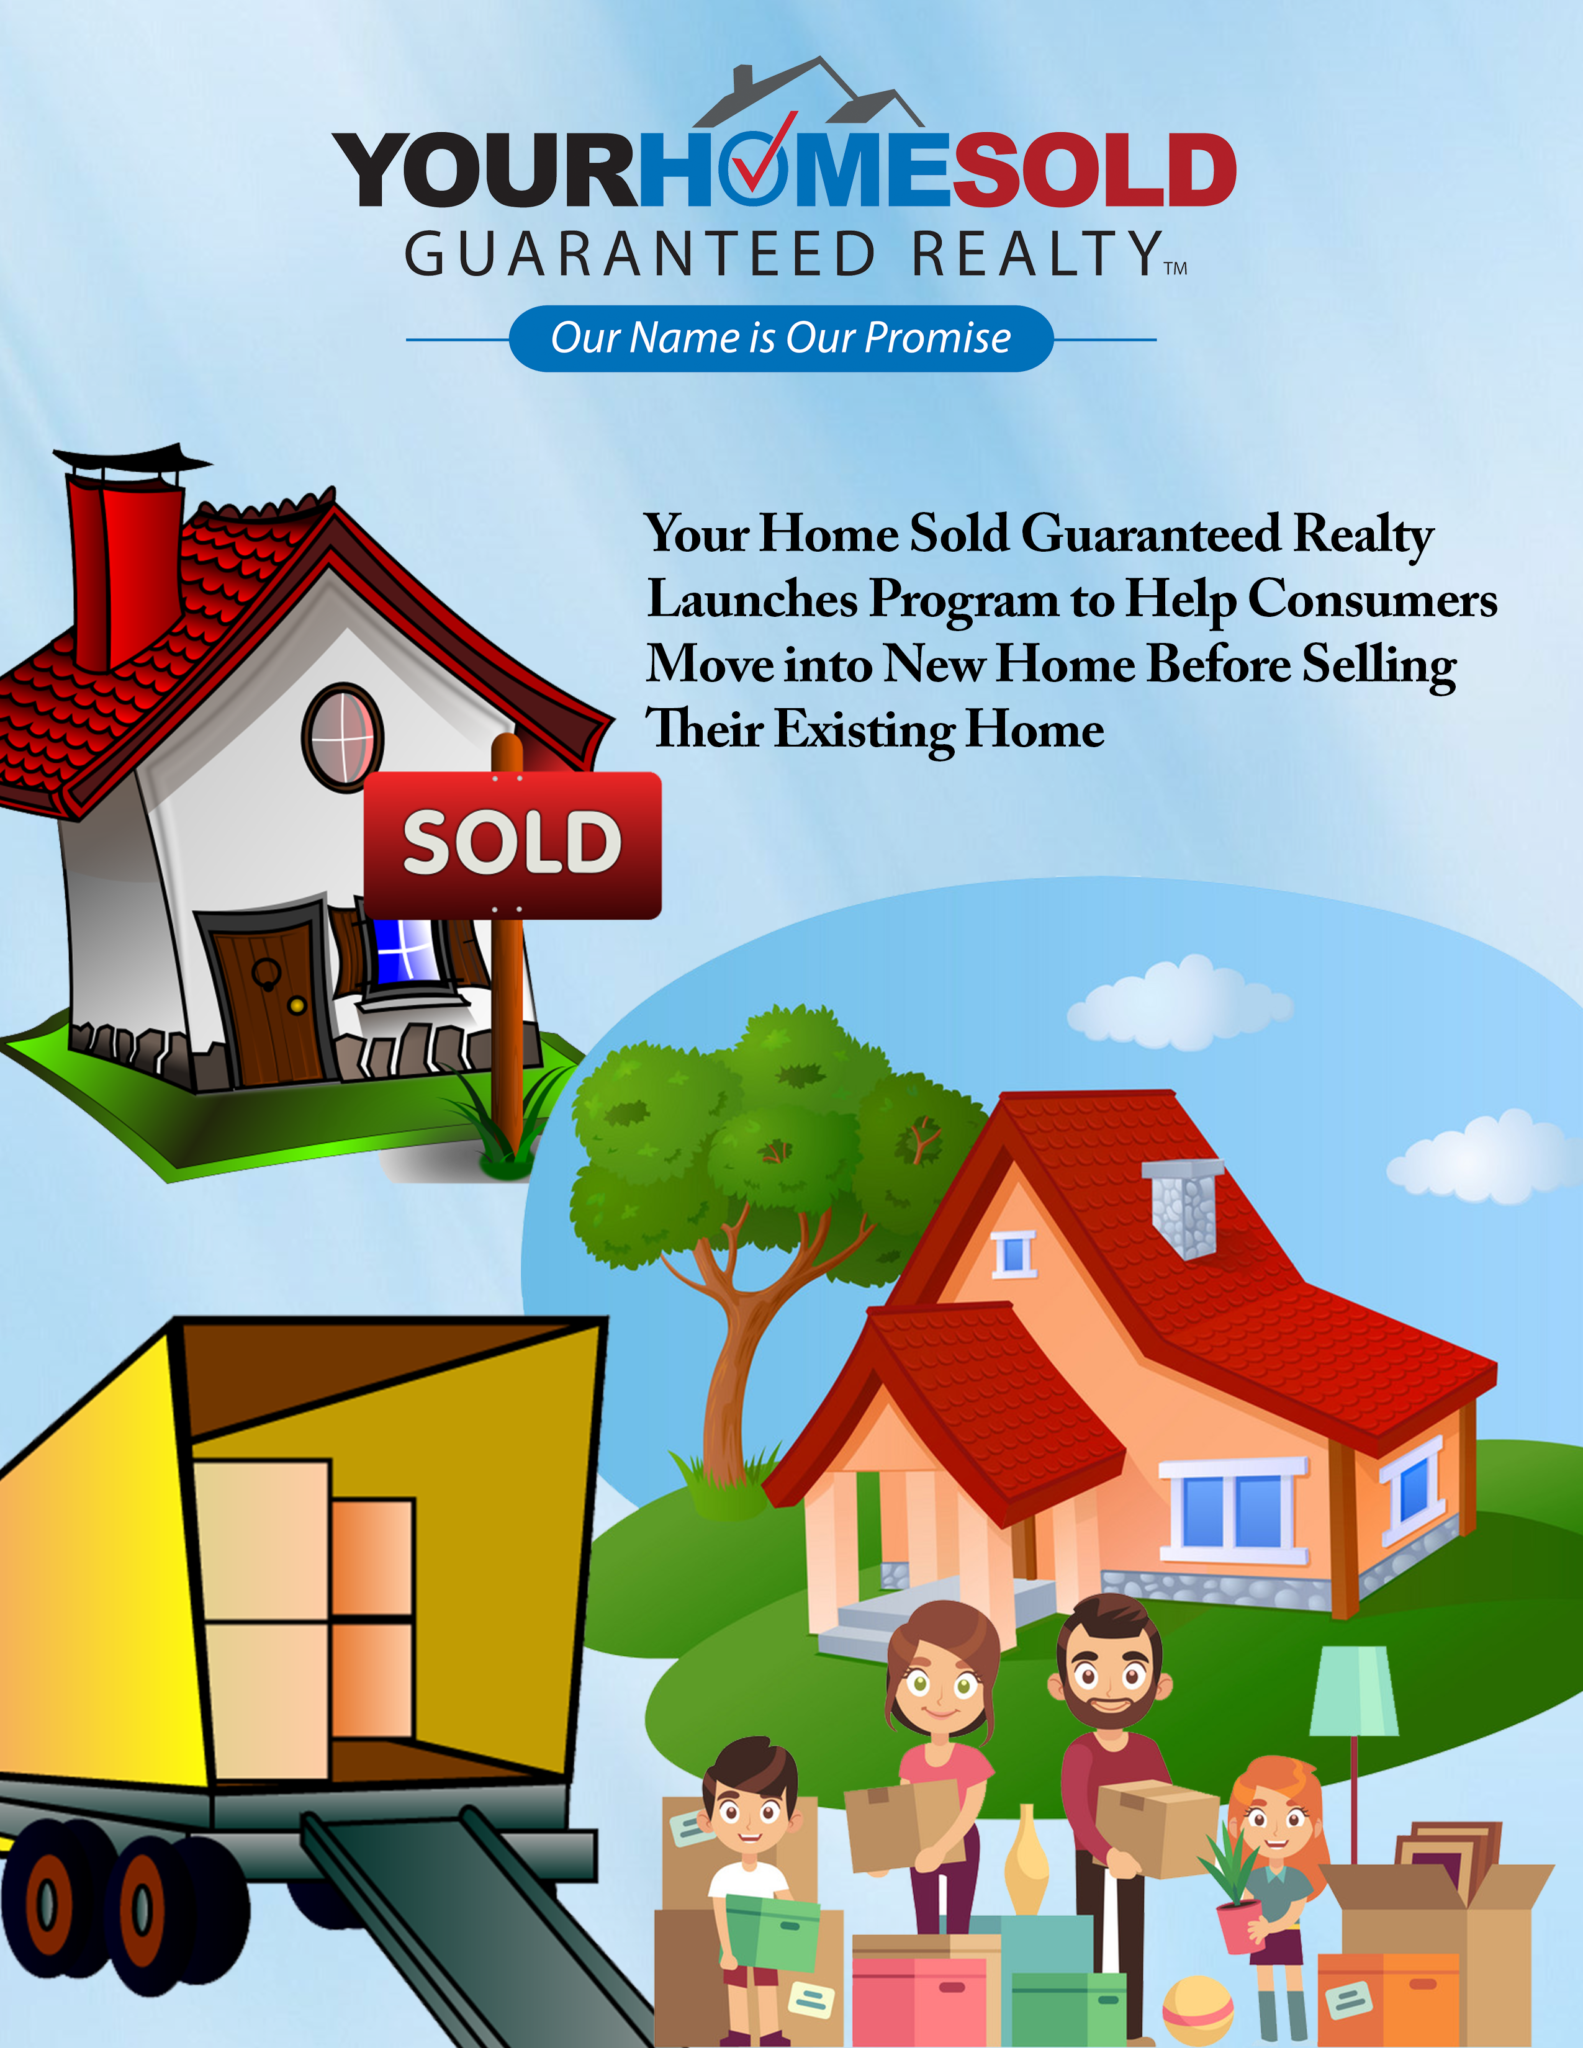 Your-Home-Sold-Guaranteed-Realty-Launches-Program-to-Help-Consumers-Move-into-New-Home-Before-Selling-Their-Existing-Home-1583x2048.png